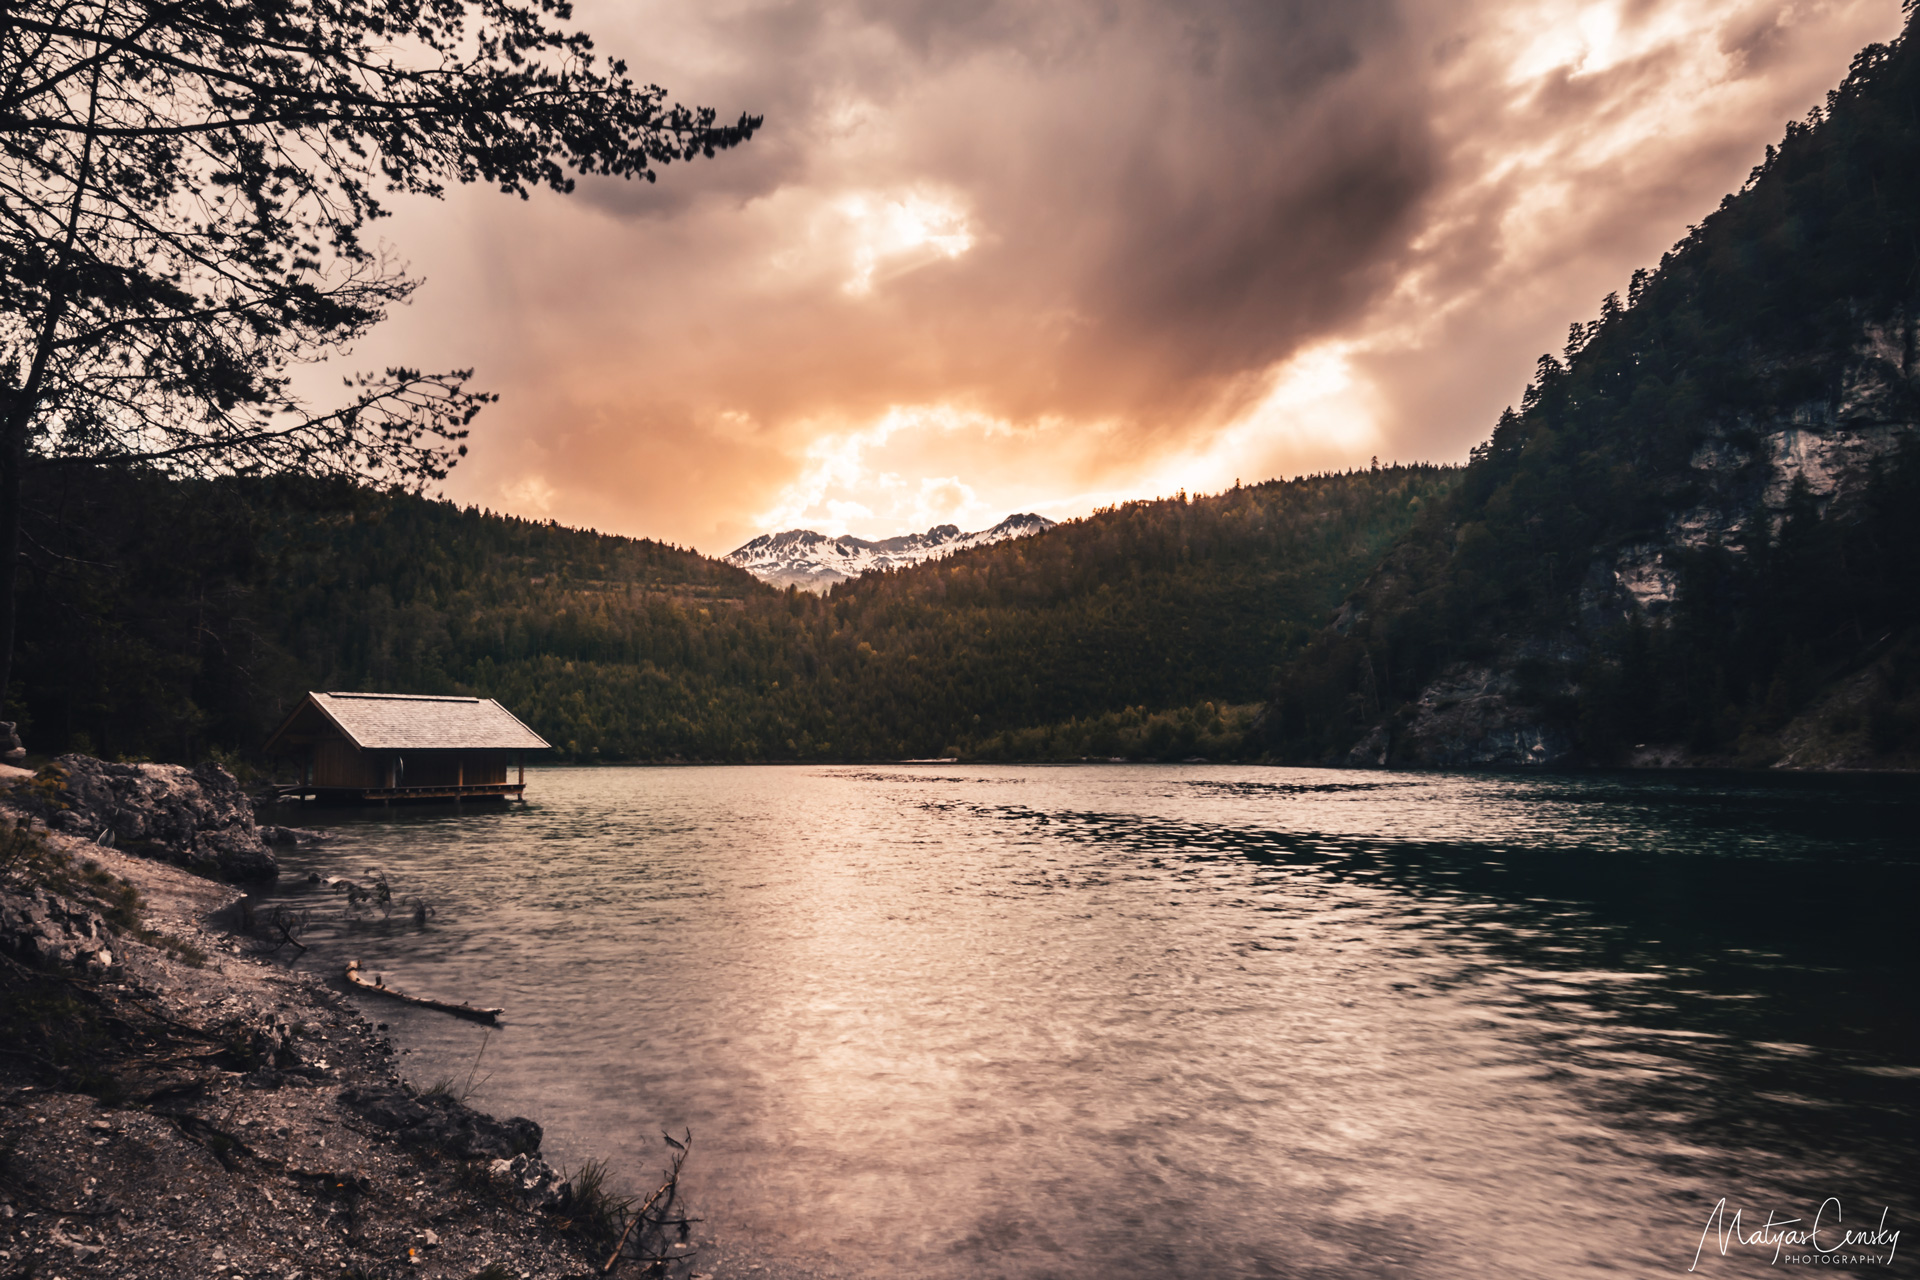 Photo of a sunset over Blinsee, Austria, with wooden hut on a shore.